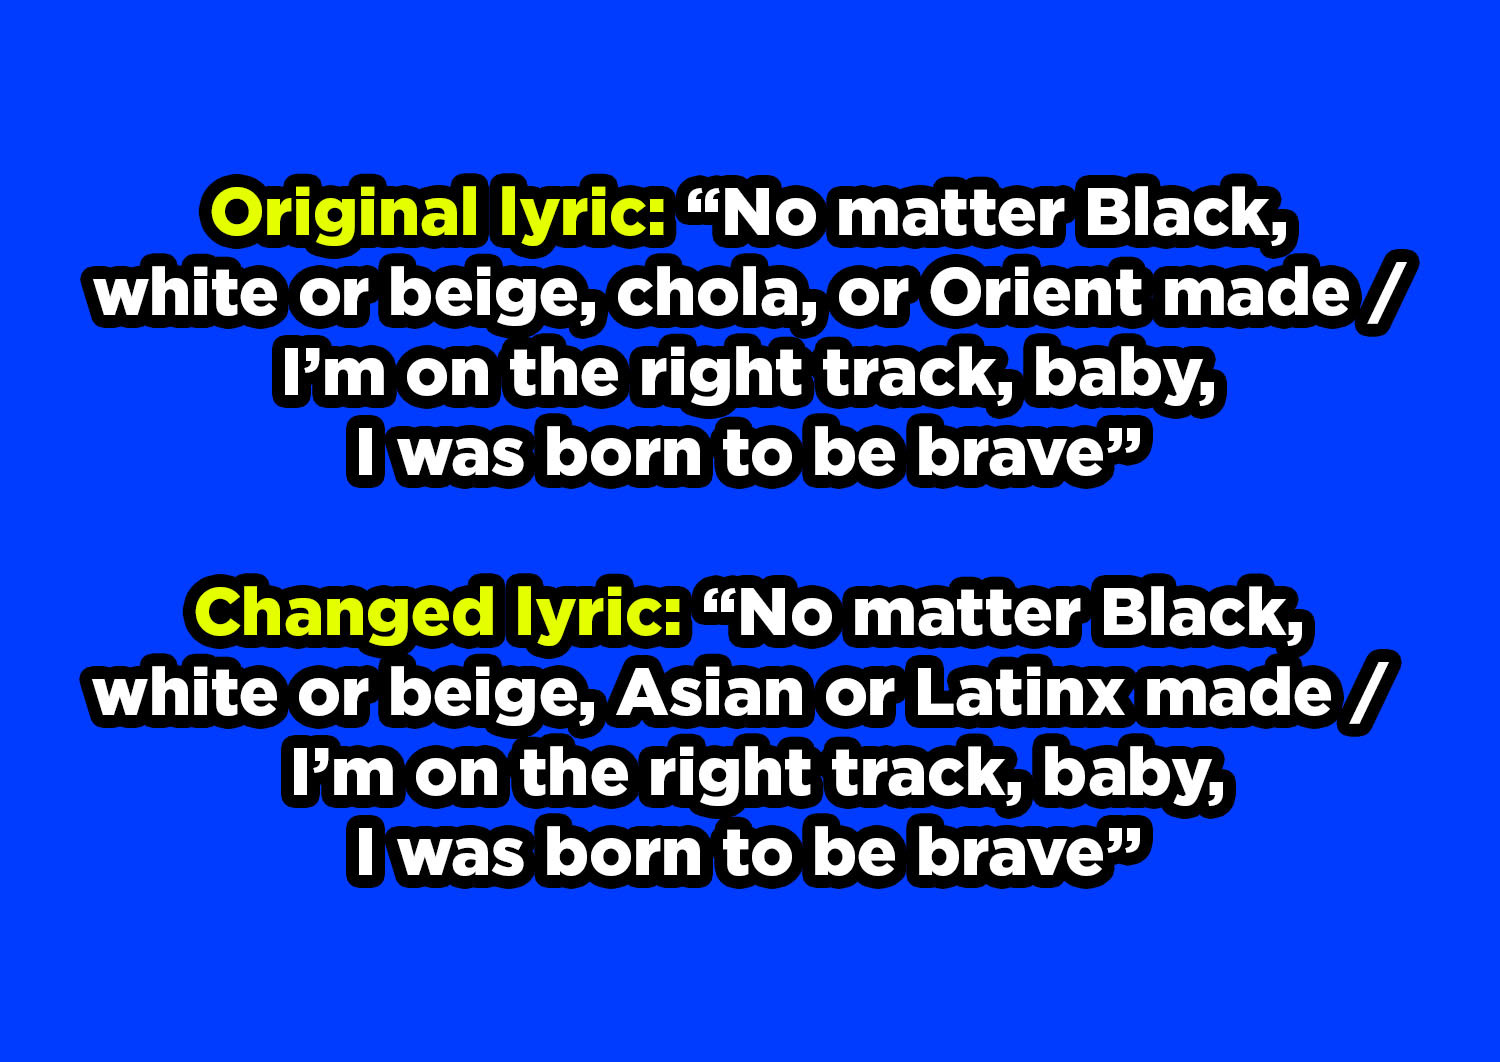 Original lyric &quot;No matter Black, white or beige, chola, or Orient made&quot; changed to &quot;No matter Black, white or beige, Asian or Latinx made&quot;